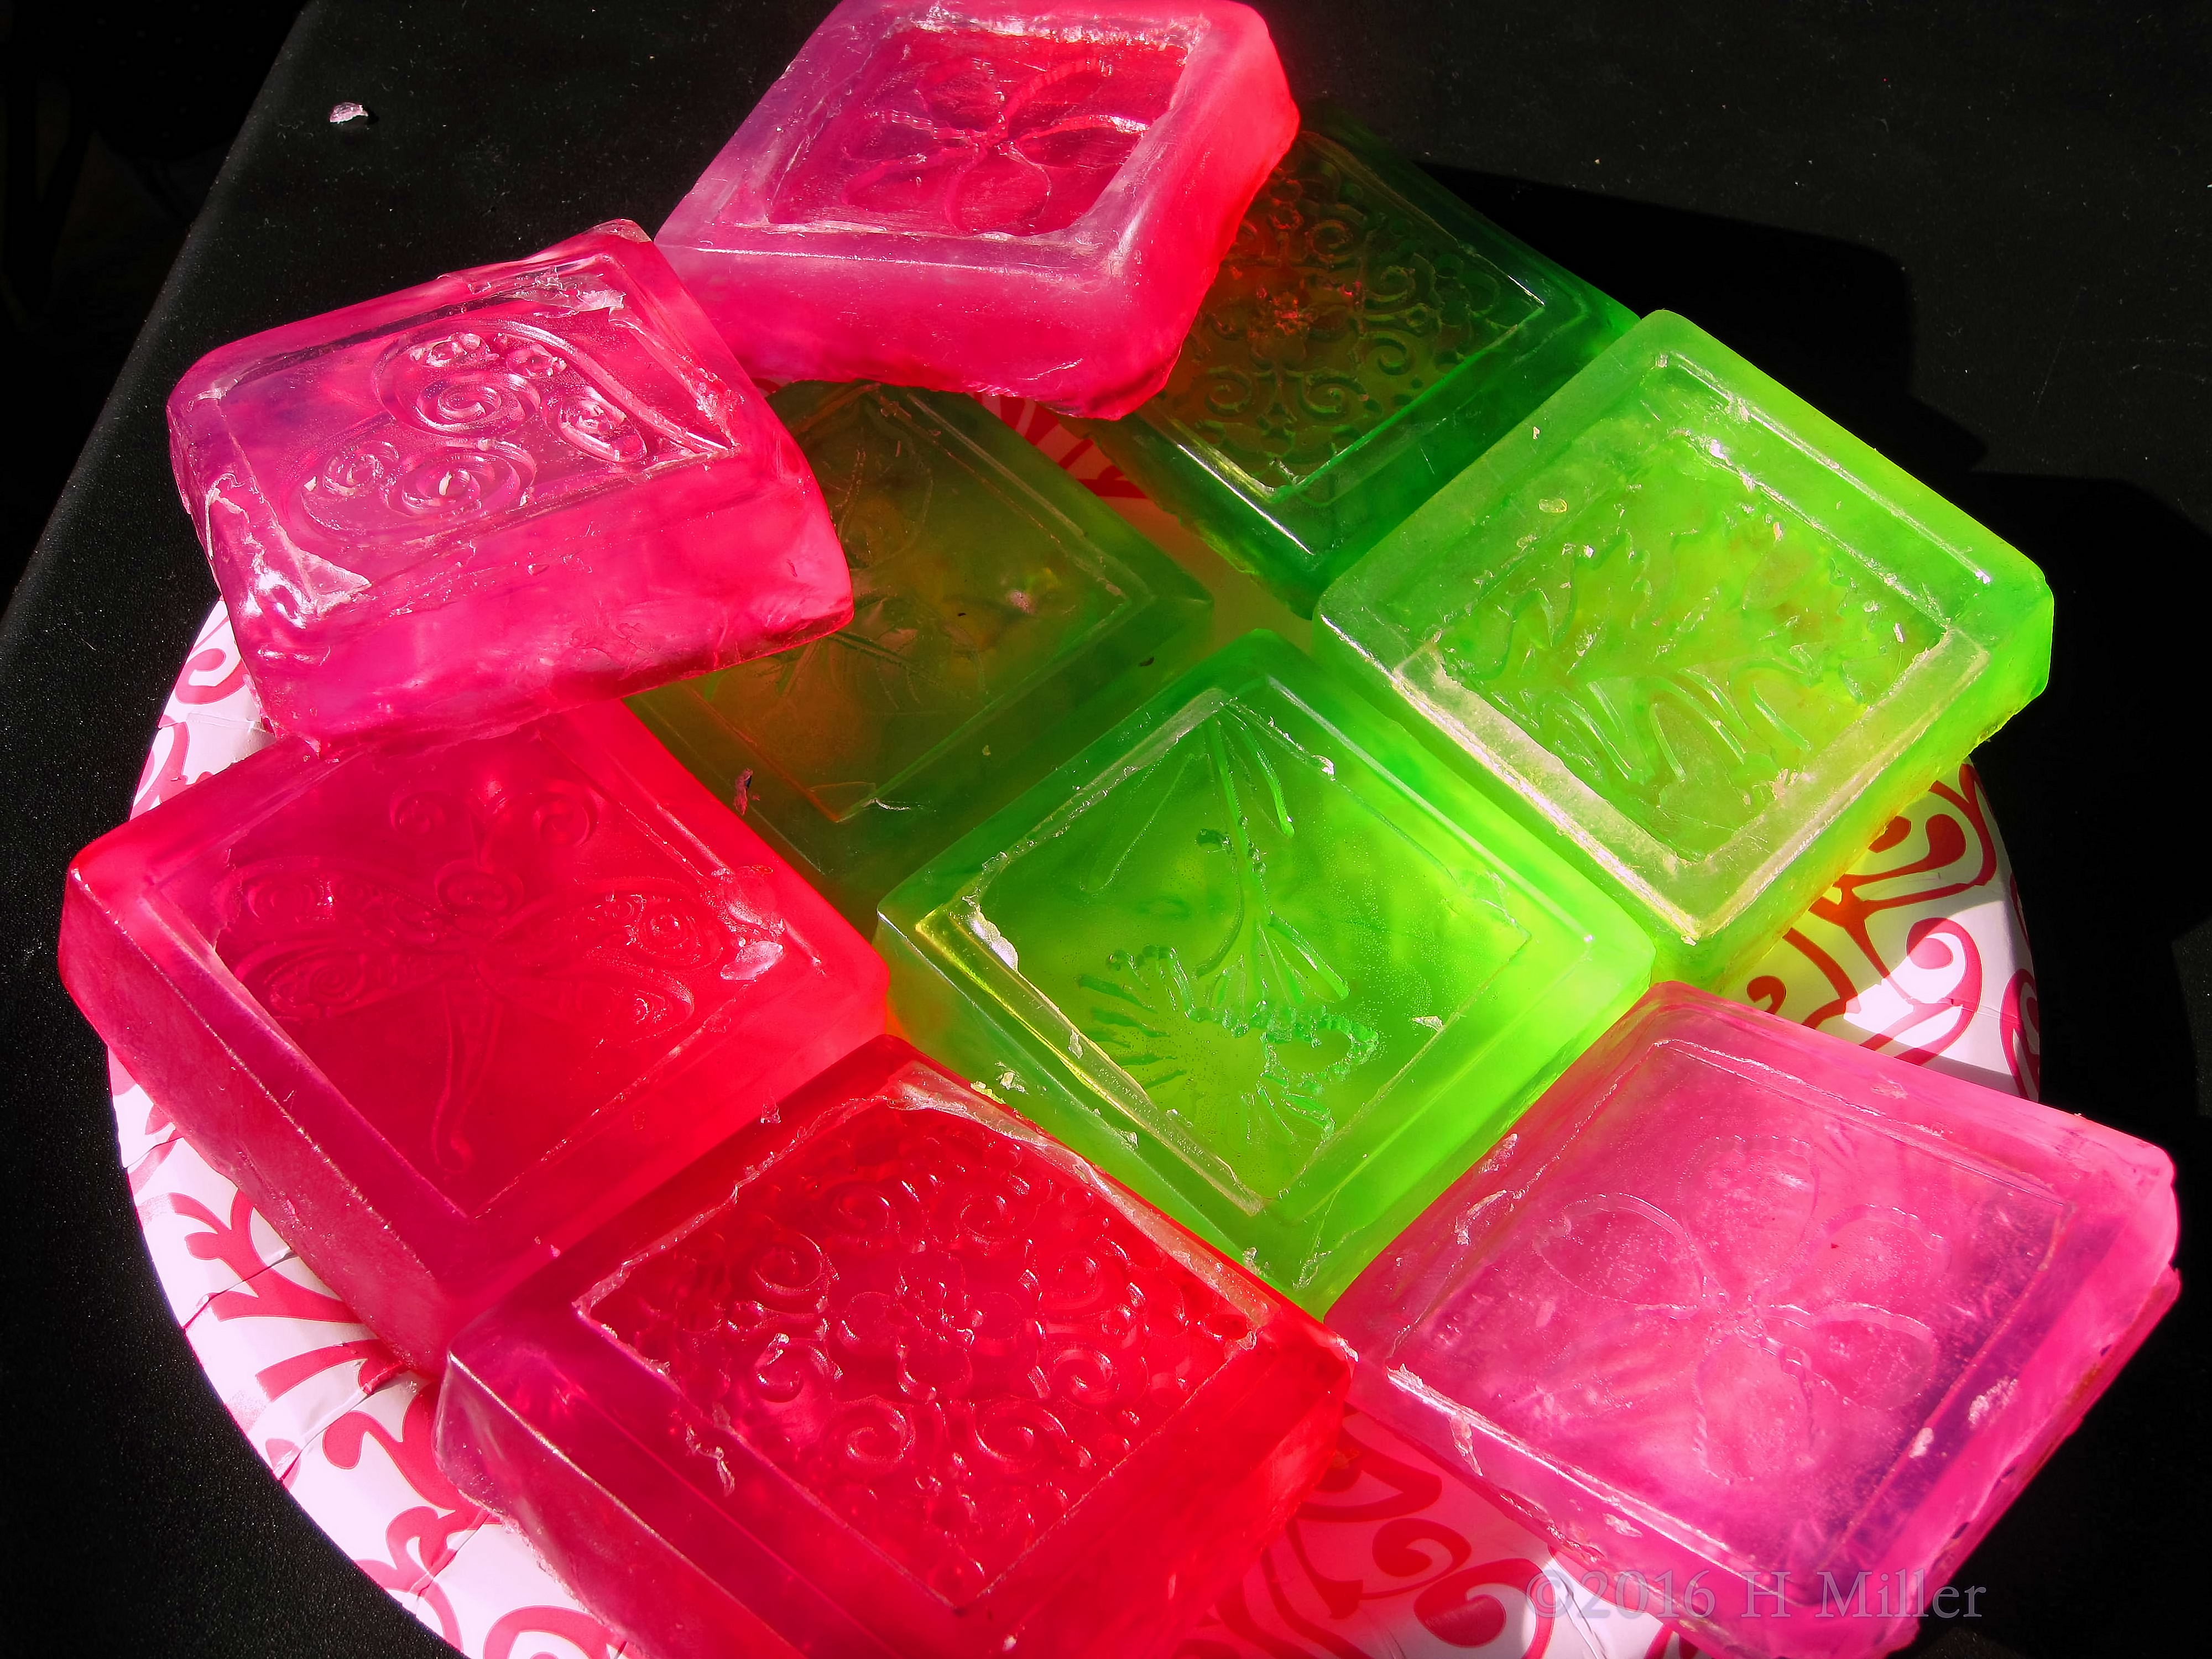 What Lovely Colorful Kids Crafts! Homemade Soap Is Fun To Make At The Kids Spa! 